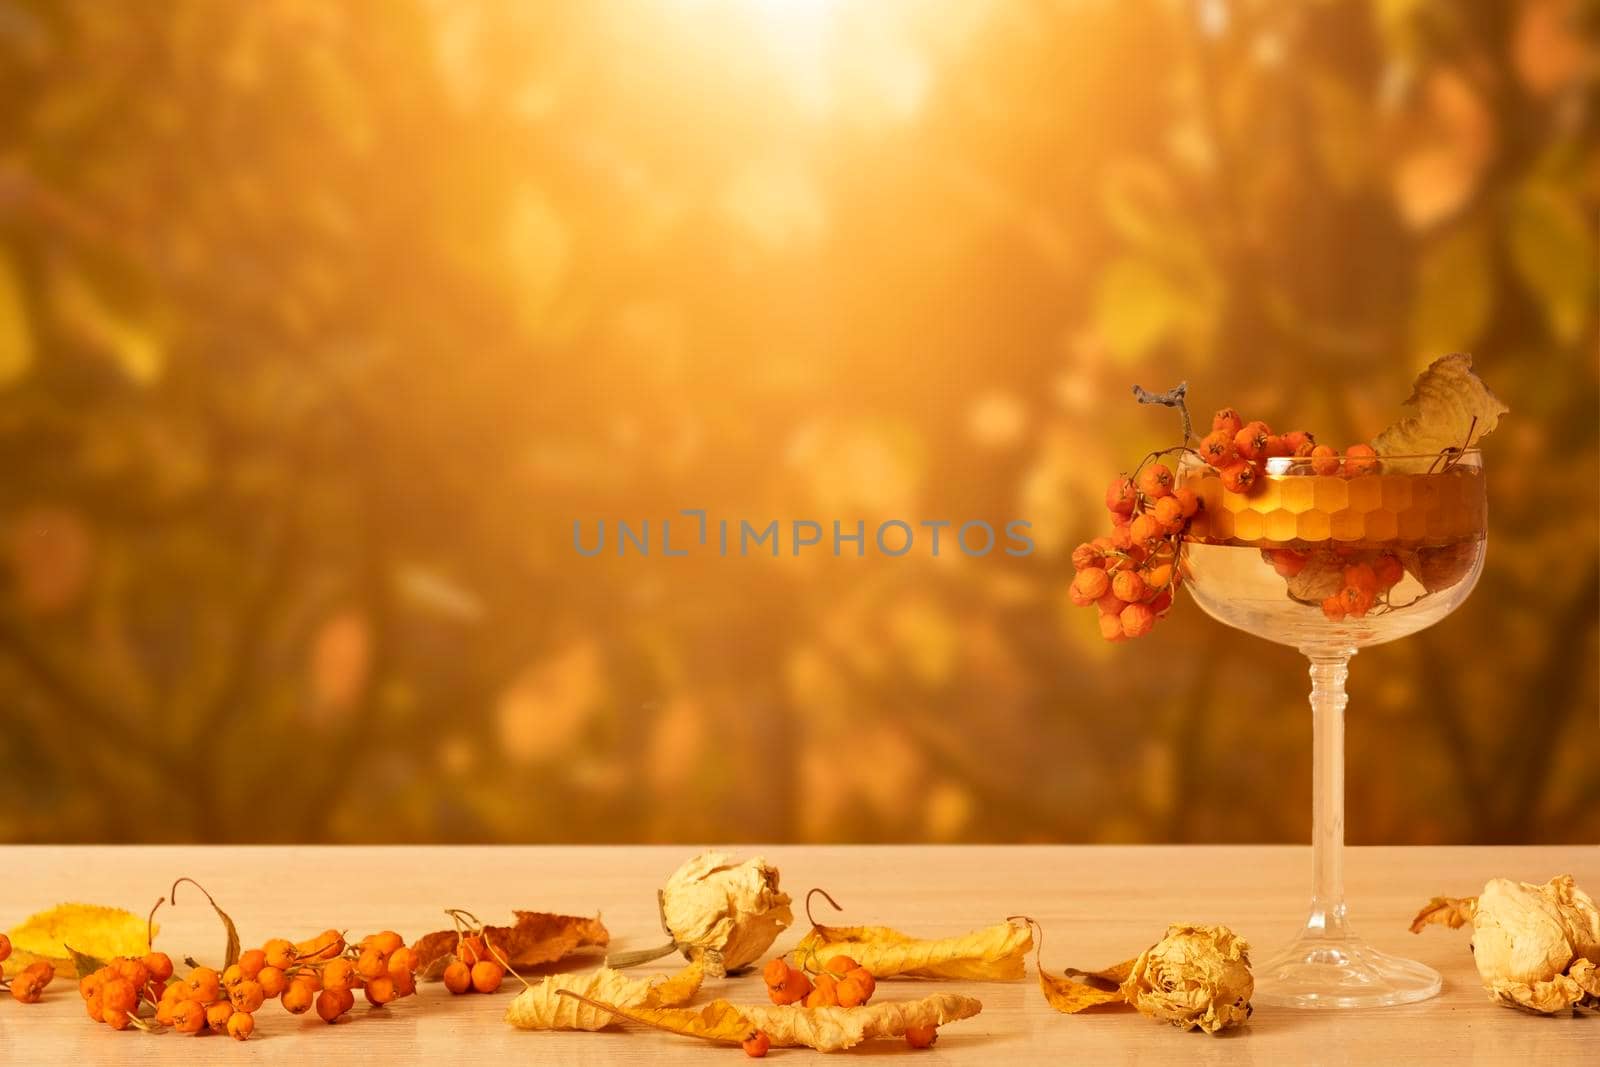 Autumn still life with glass and dry plants on autumn leaf background with sunlight. Abstract autumn composition